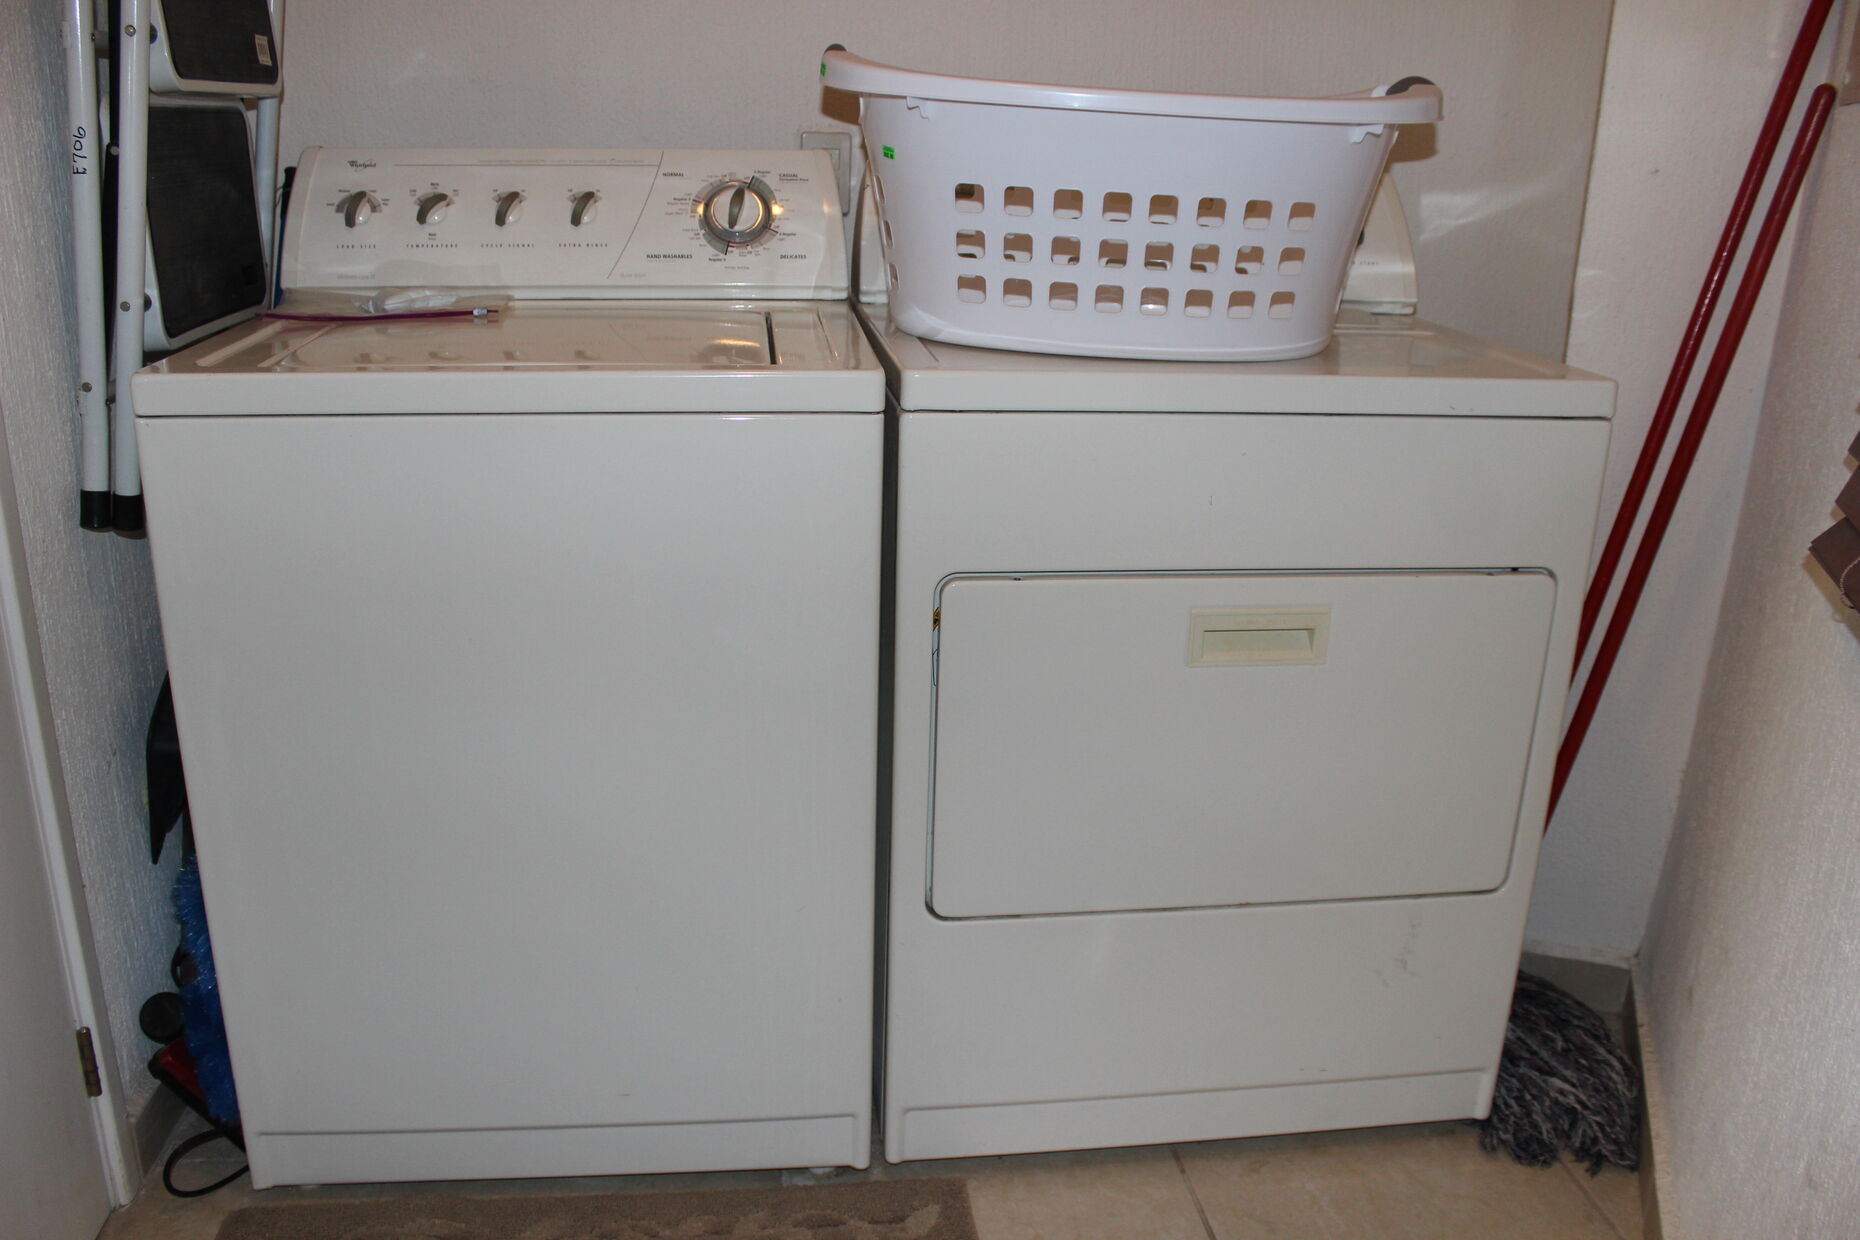 LAUNDRY ROOM - WASHER DRYER REPLACED 2023. UPDATED PICTURE PENDING